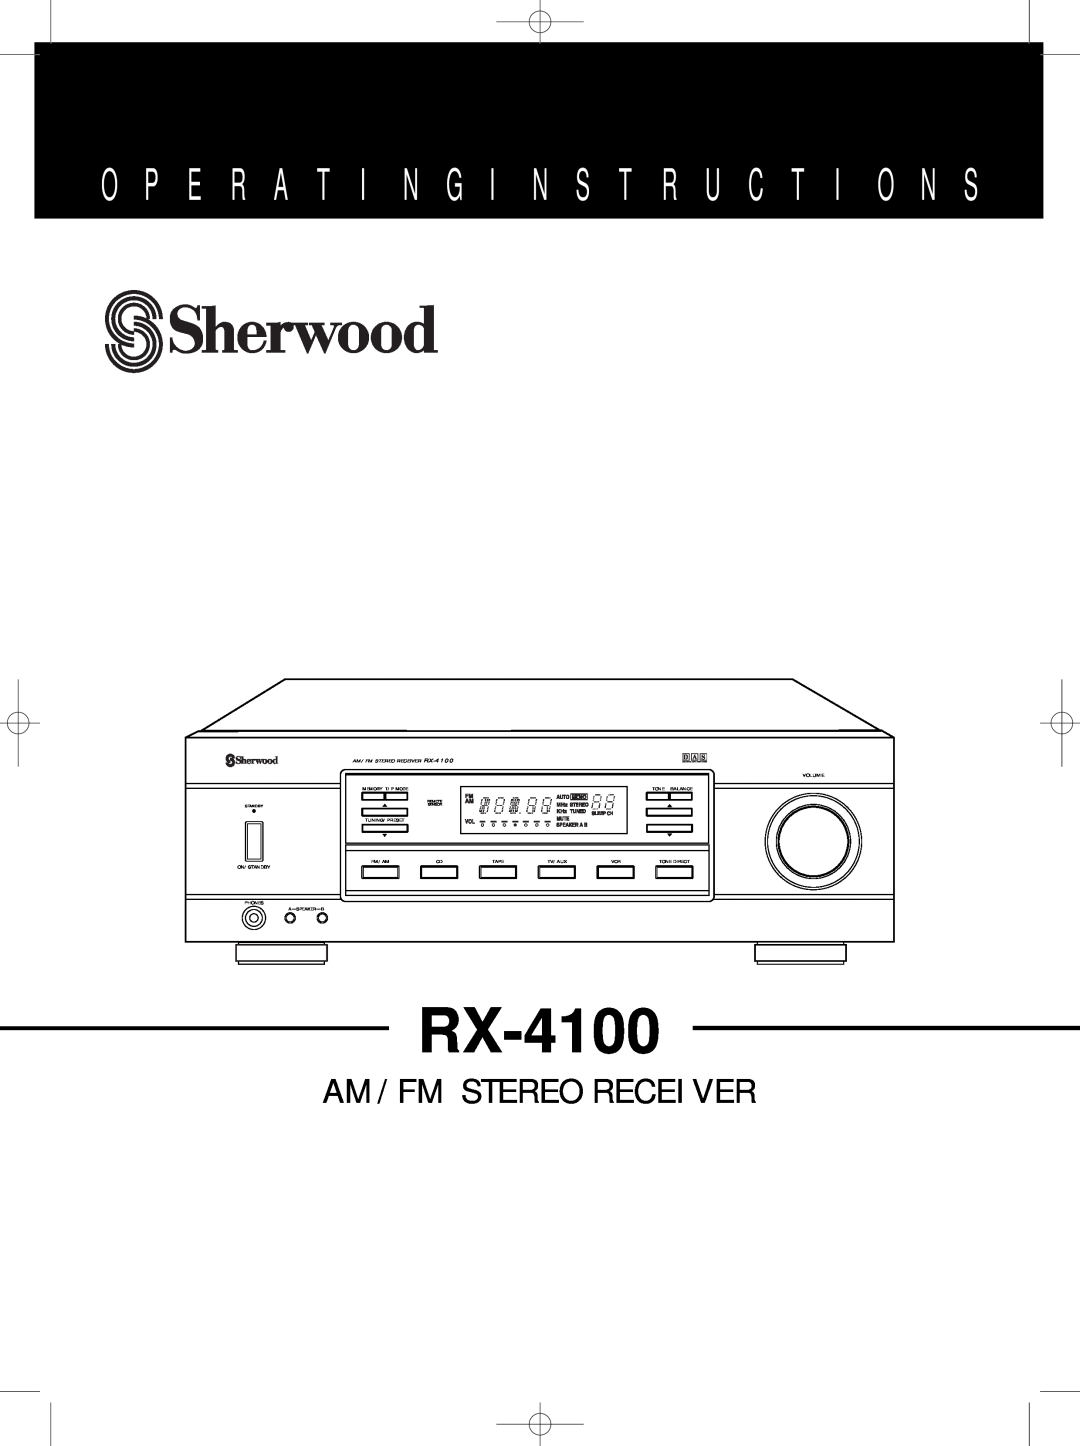 Sherwood RX-4100 manual O P E R A T I N G I N S T R U C T I O N S, Am/Fm Stereo Receiver, D A S 